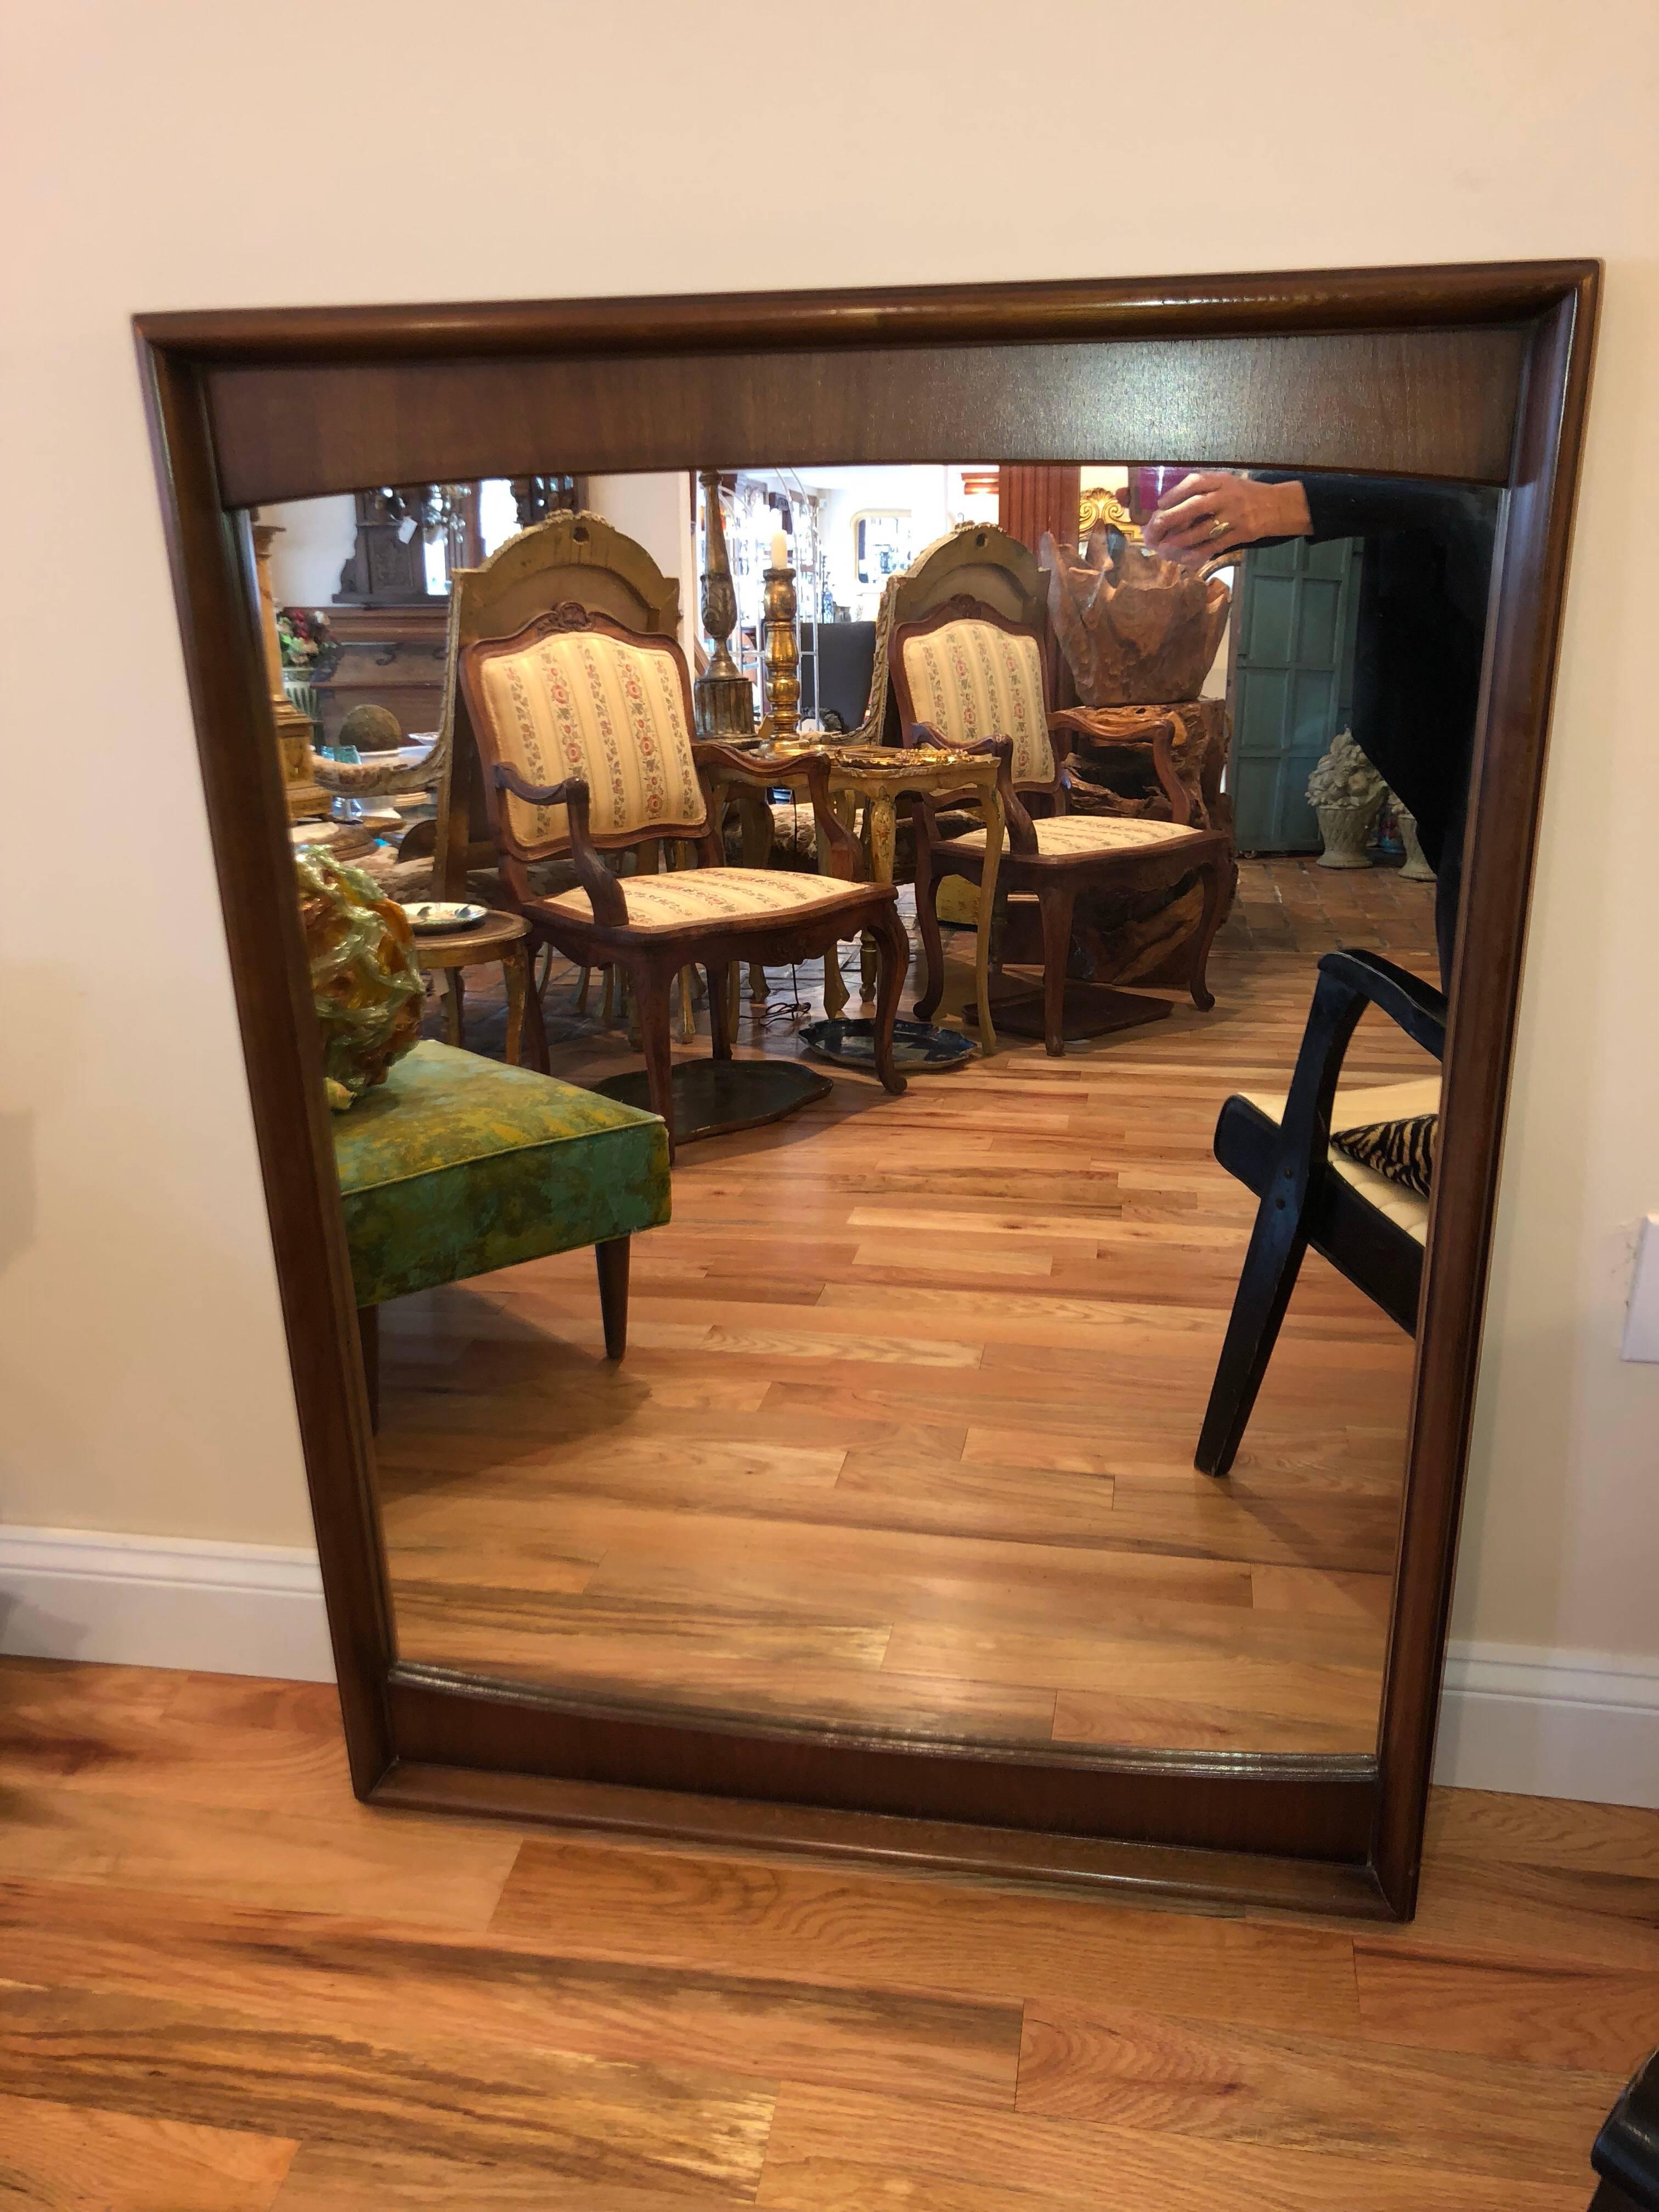 Mid-Century Modern walnut mirror. Somewhat bow-tie shaped, this mirror would look great over any mid-century table, dresser or in a bathroom. Reduced for clearance